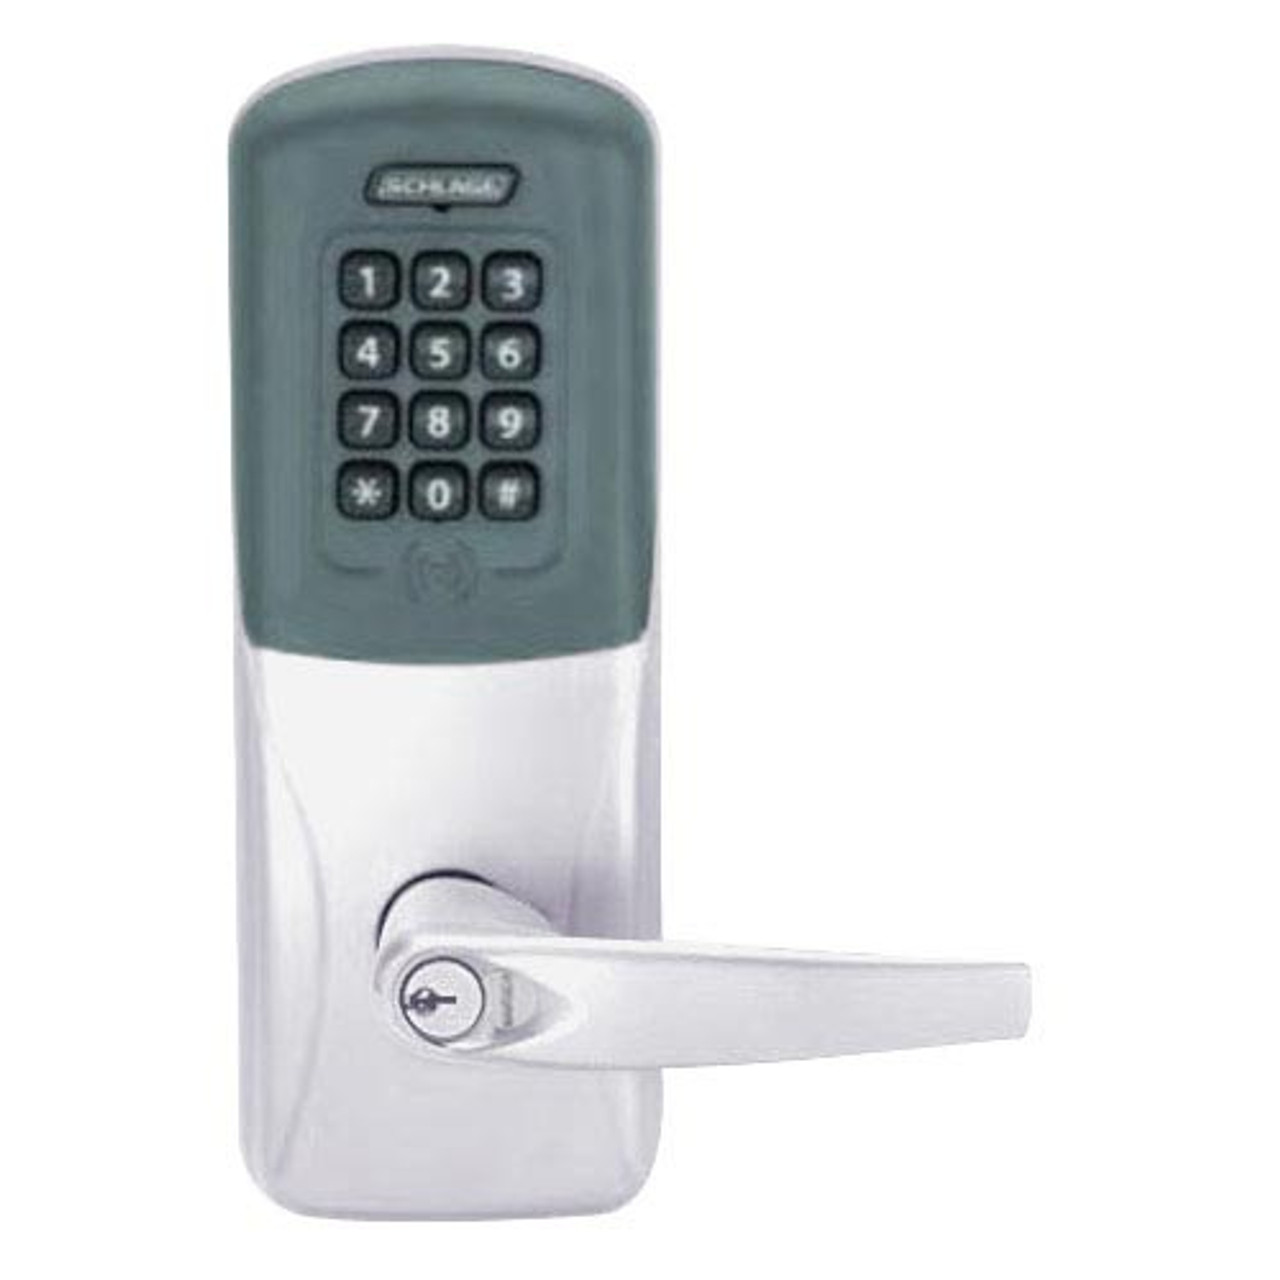 CO200-MD-40-PRK-ATH-GD-29R-626 Mortise Deadbolt Standalone Electronic Proximity with Keypad Locks in Satin Chrome